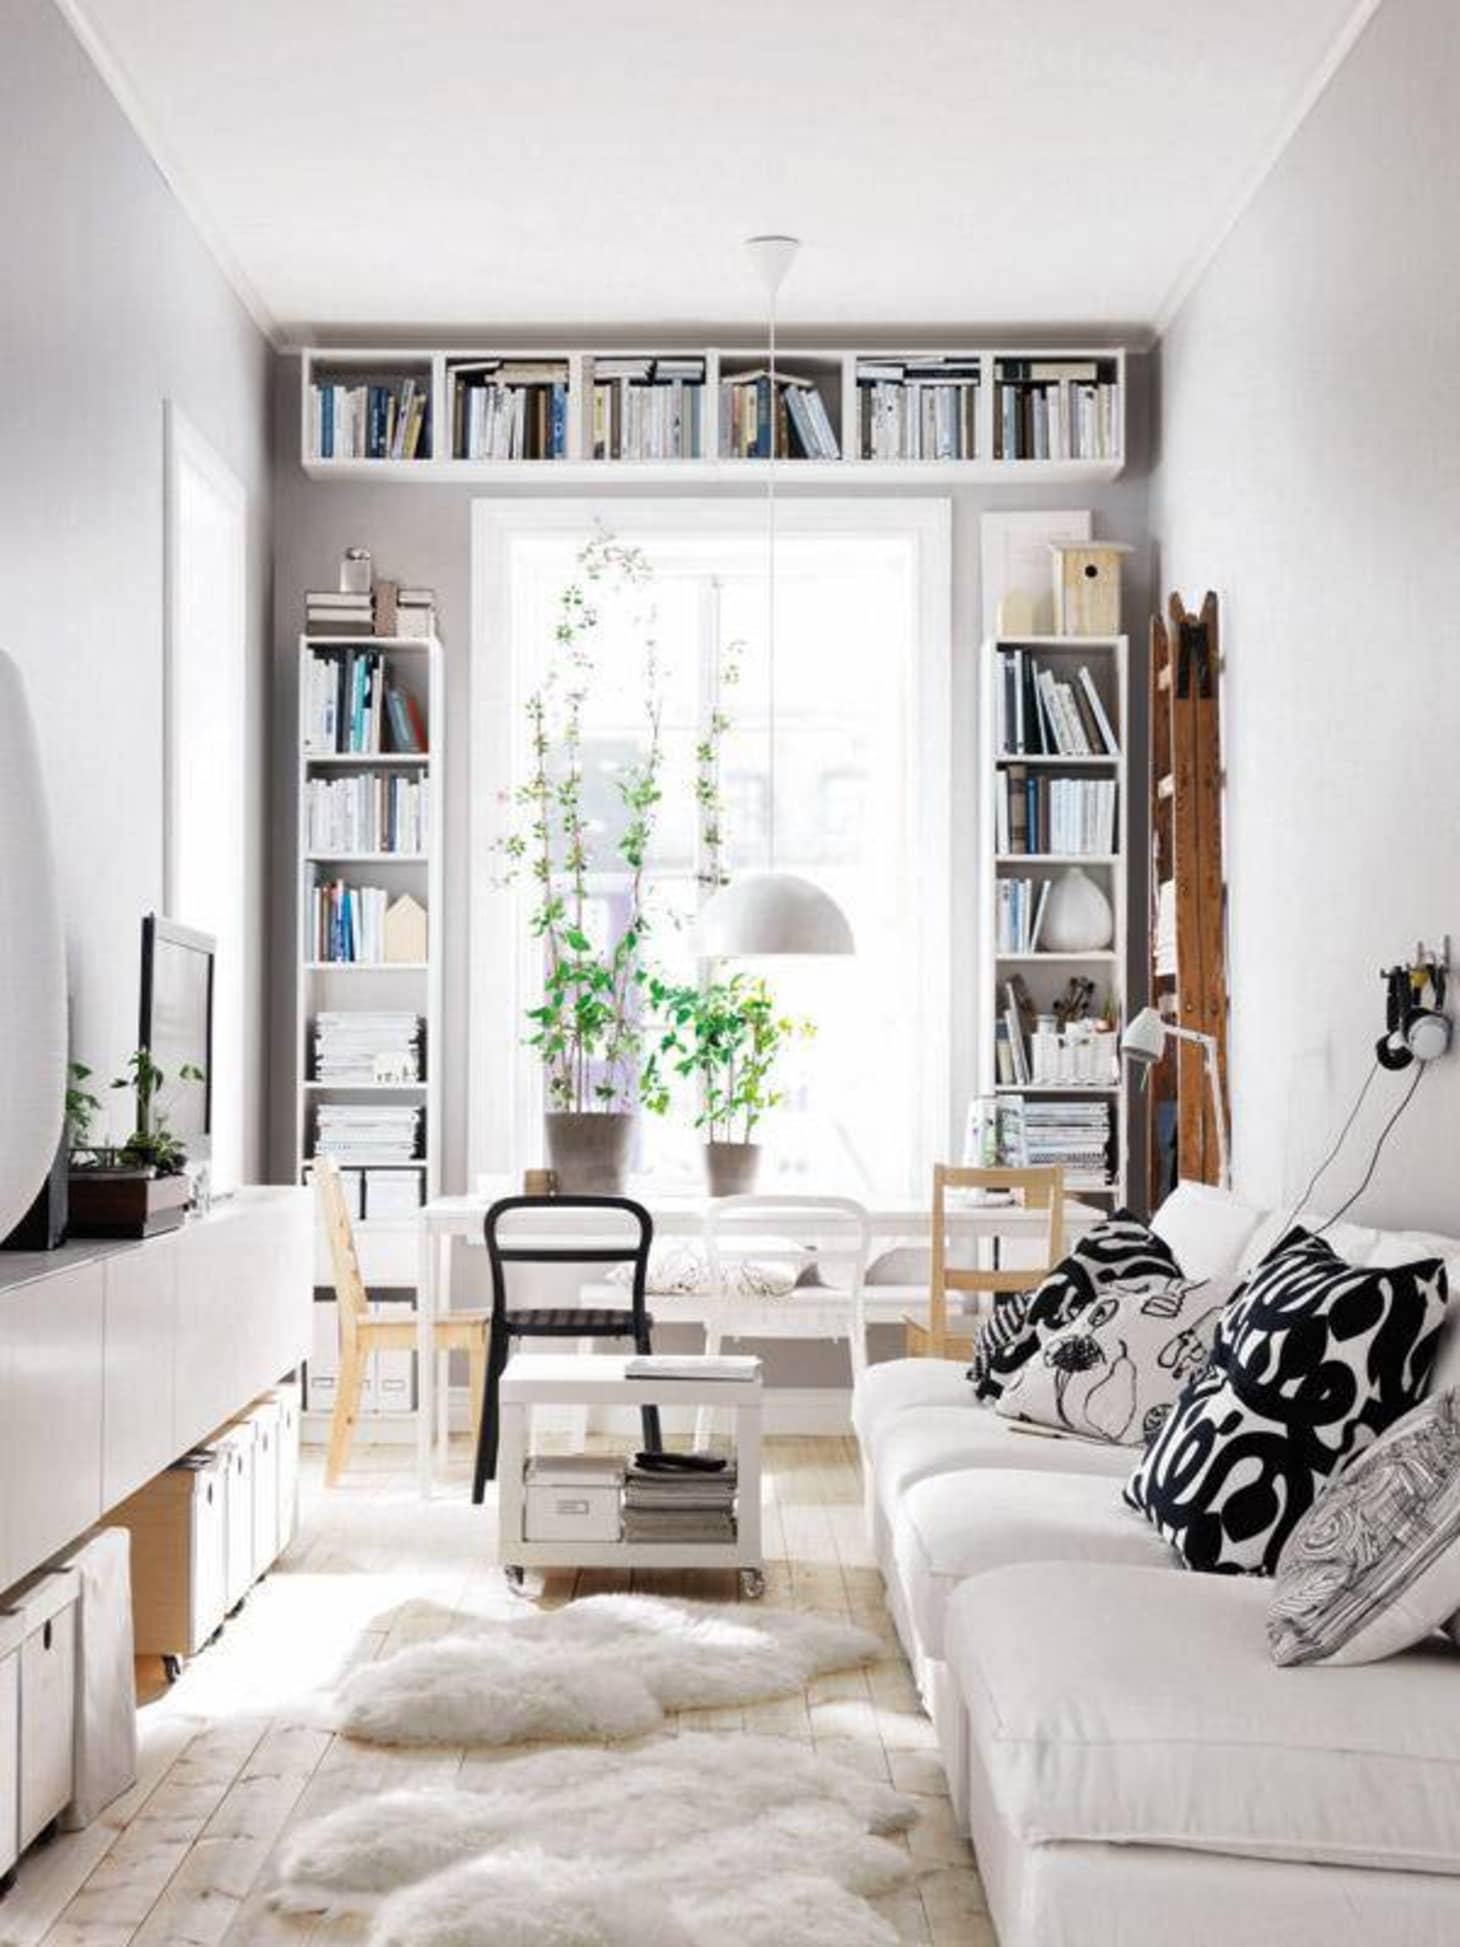 30 Small Living Room Decorating & Design Ideas - How to Decorate a